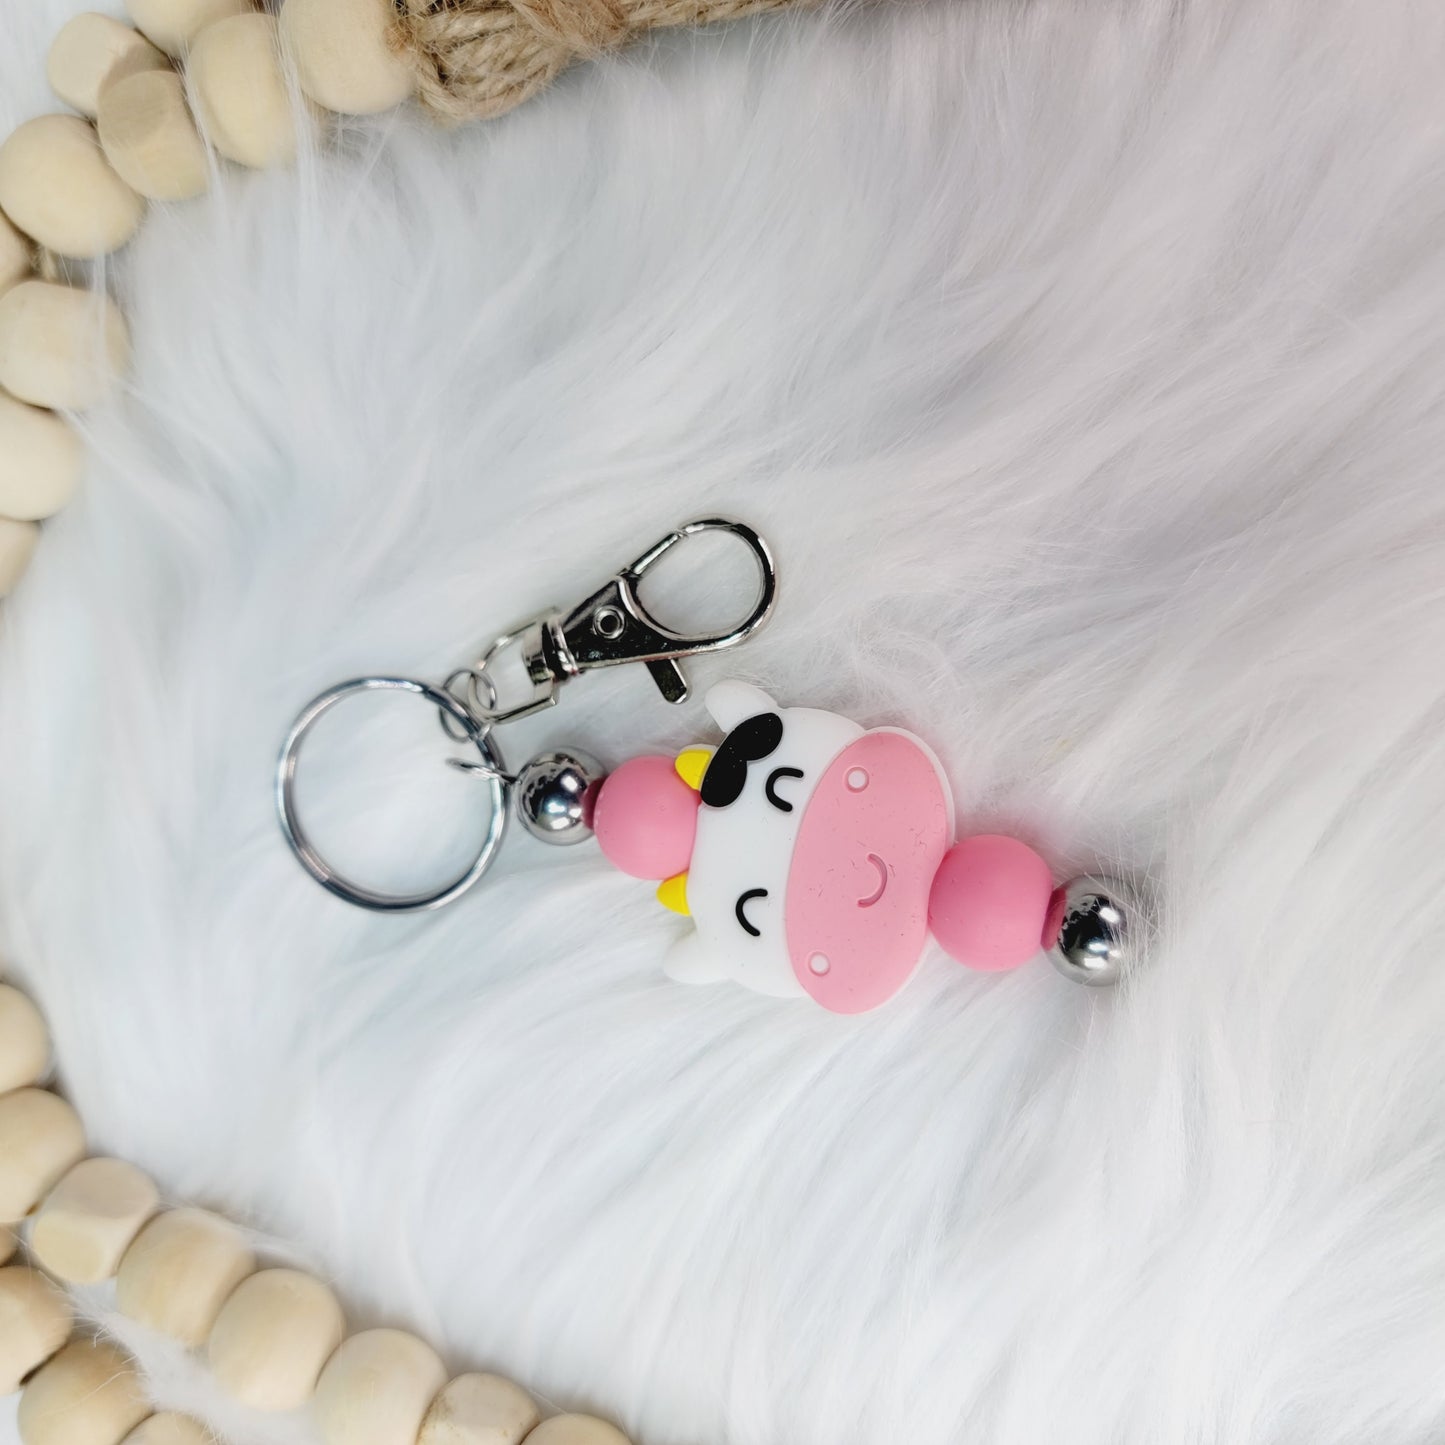 SB Keychain - Pink Cow Face